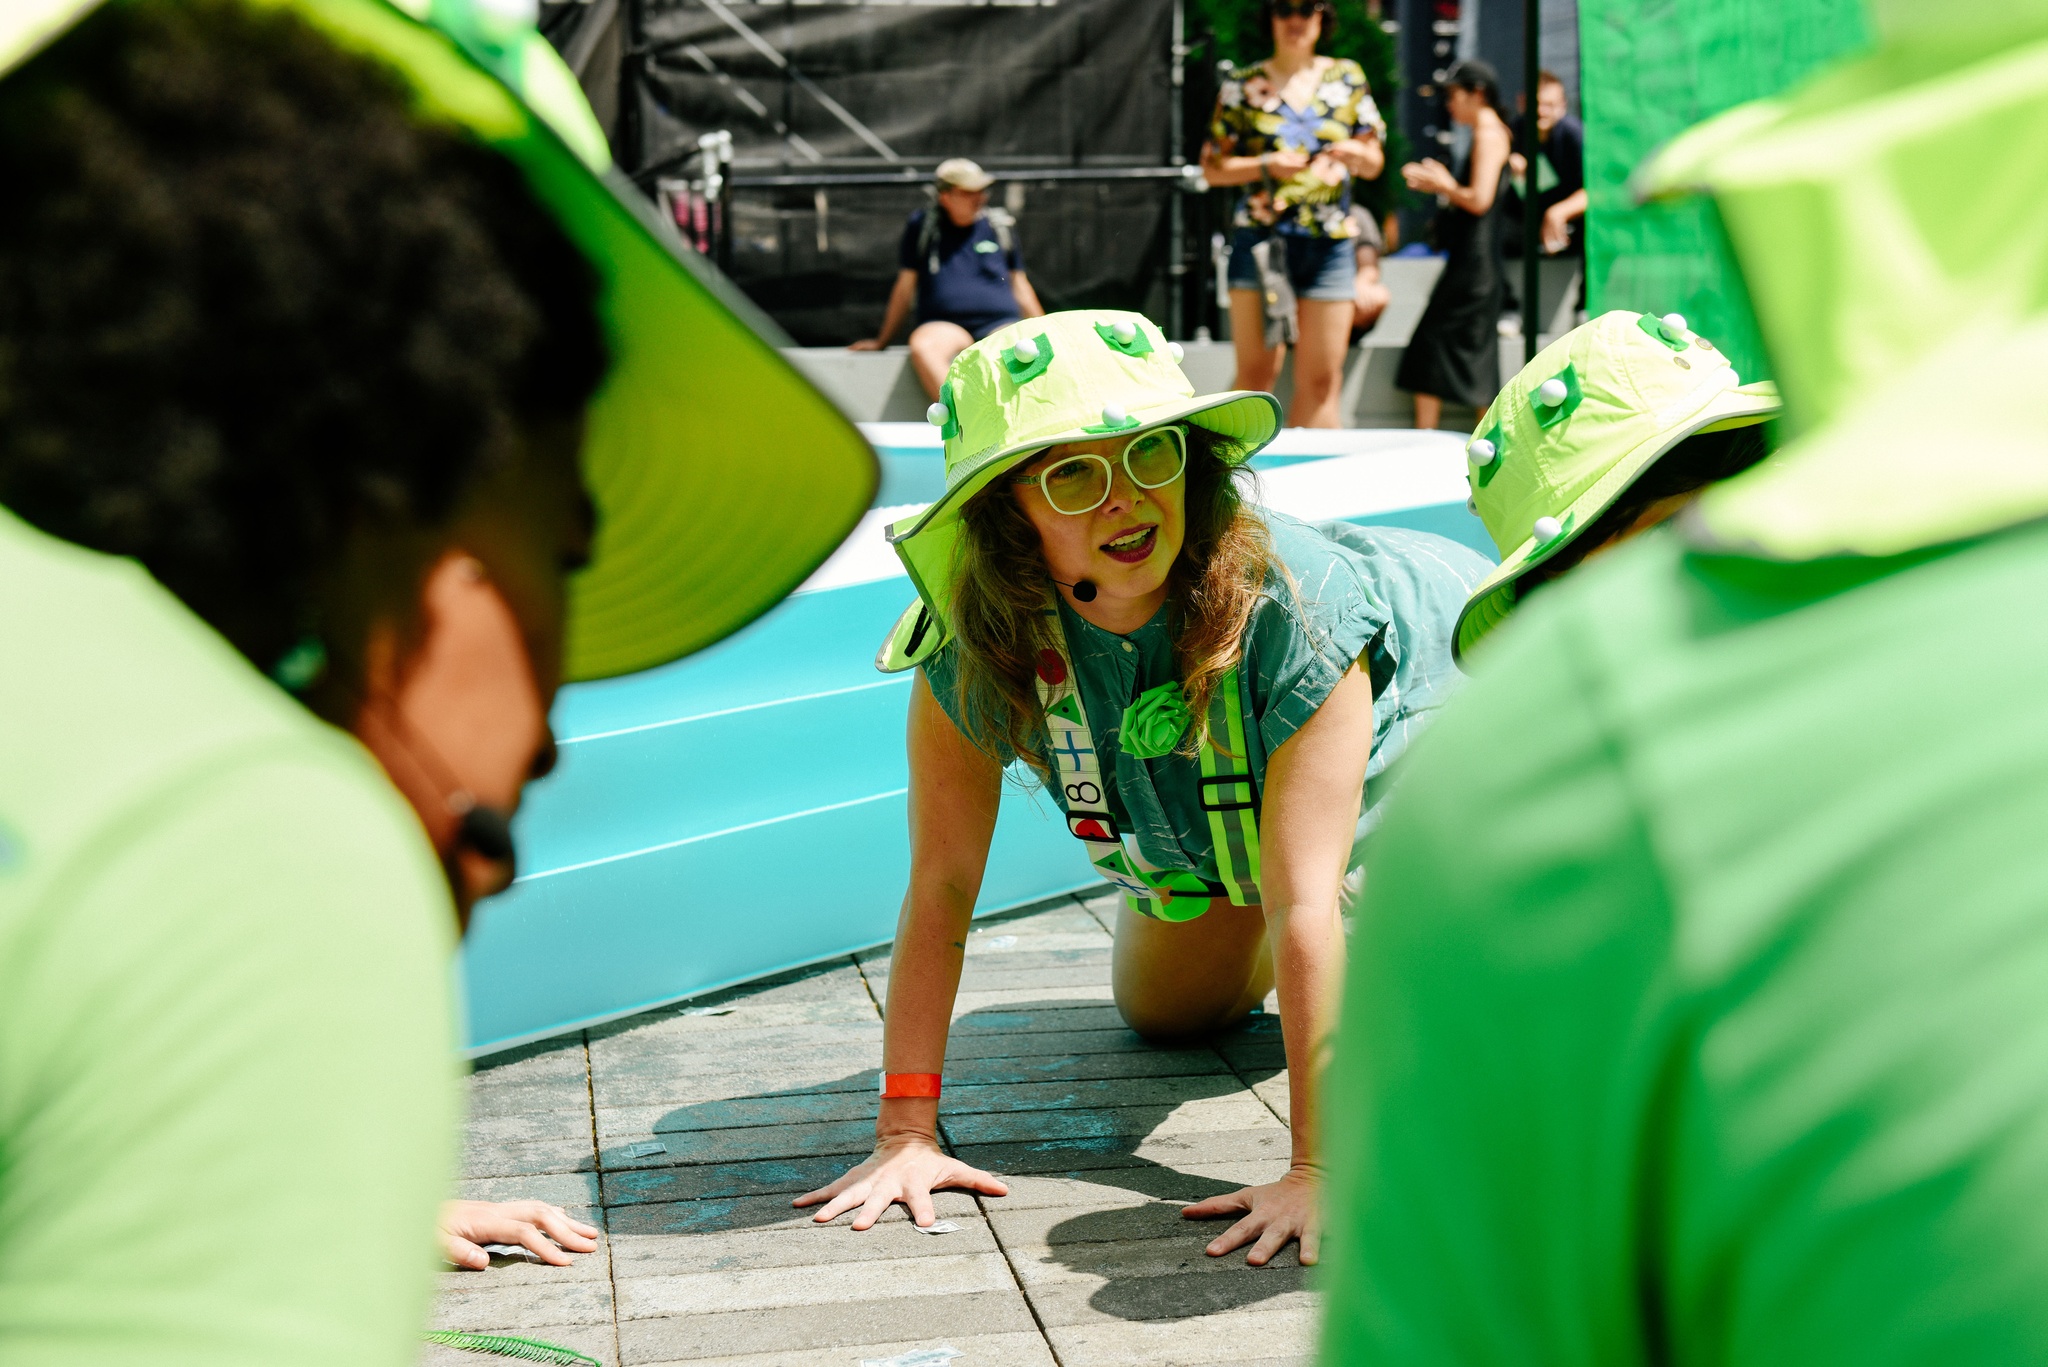 A group of participants in green hats around a kiddie pool.